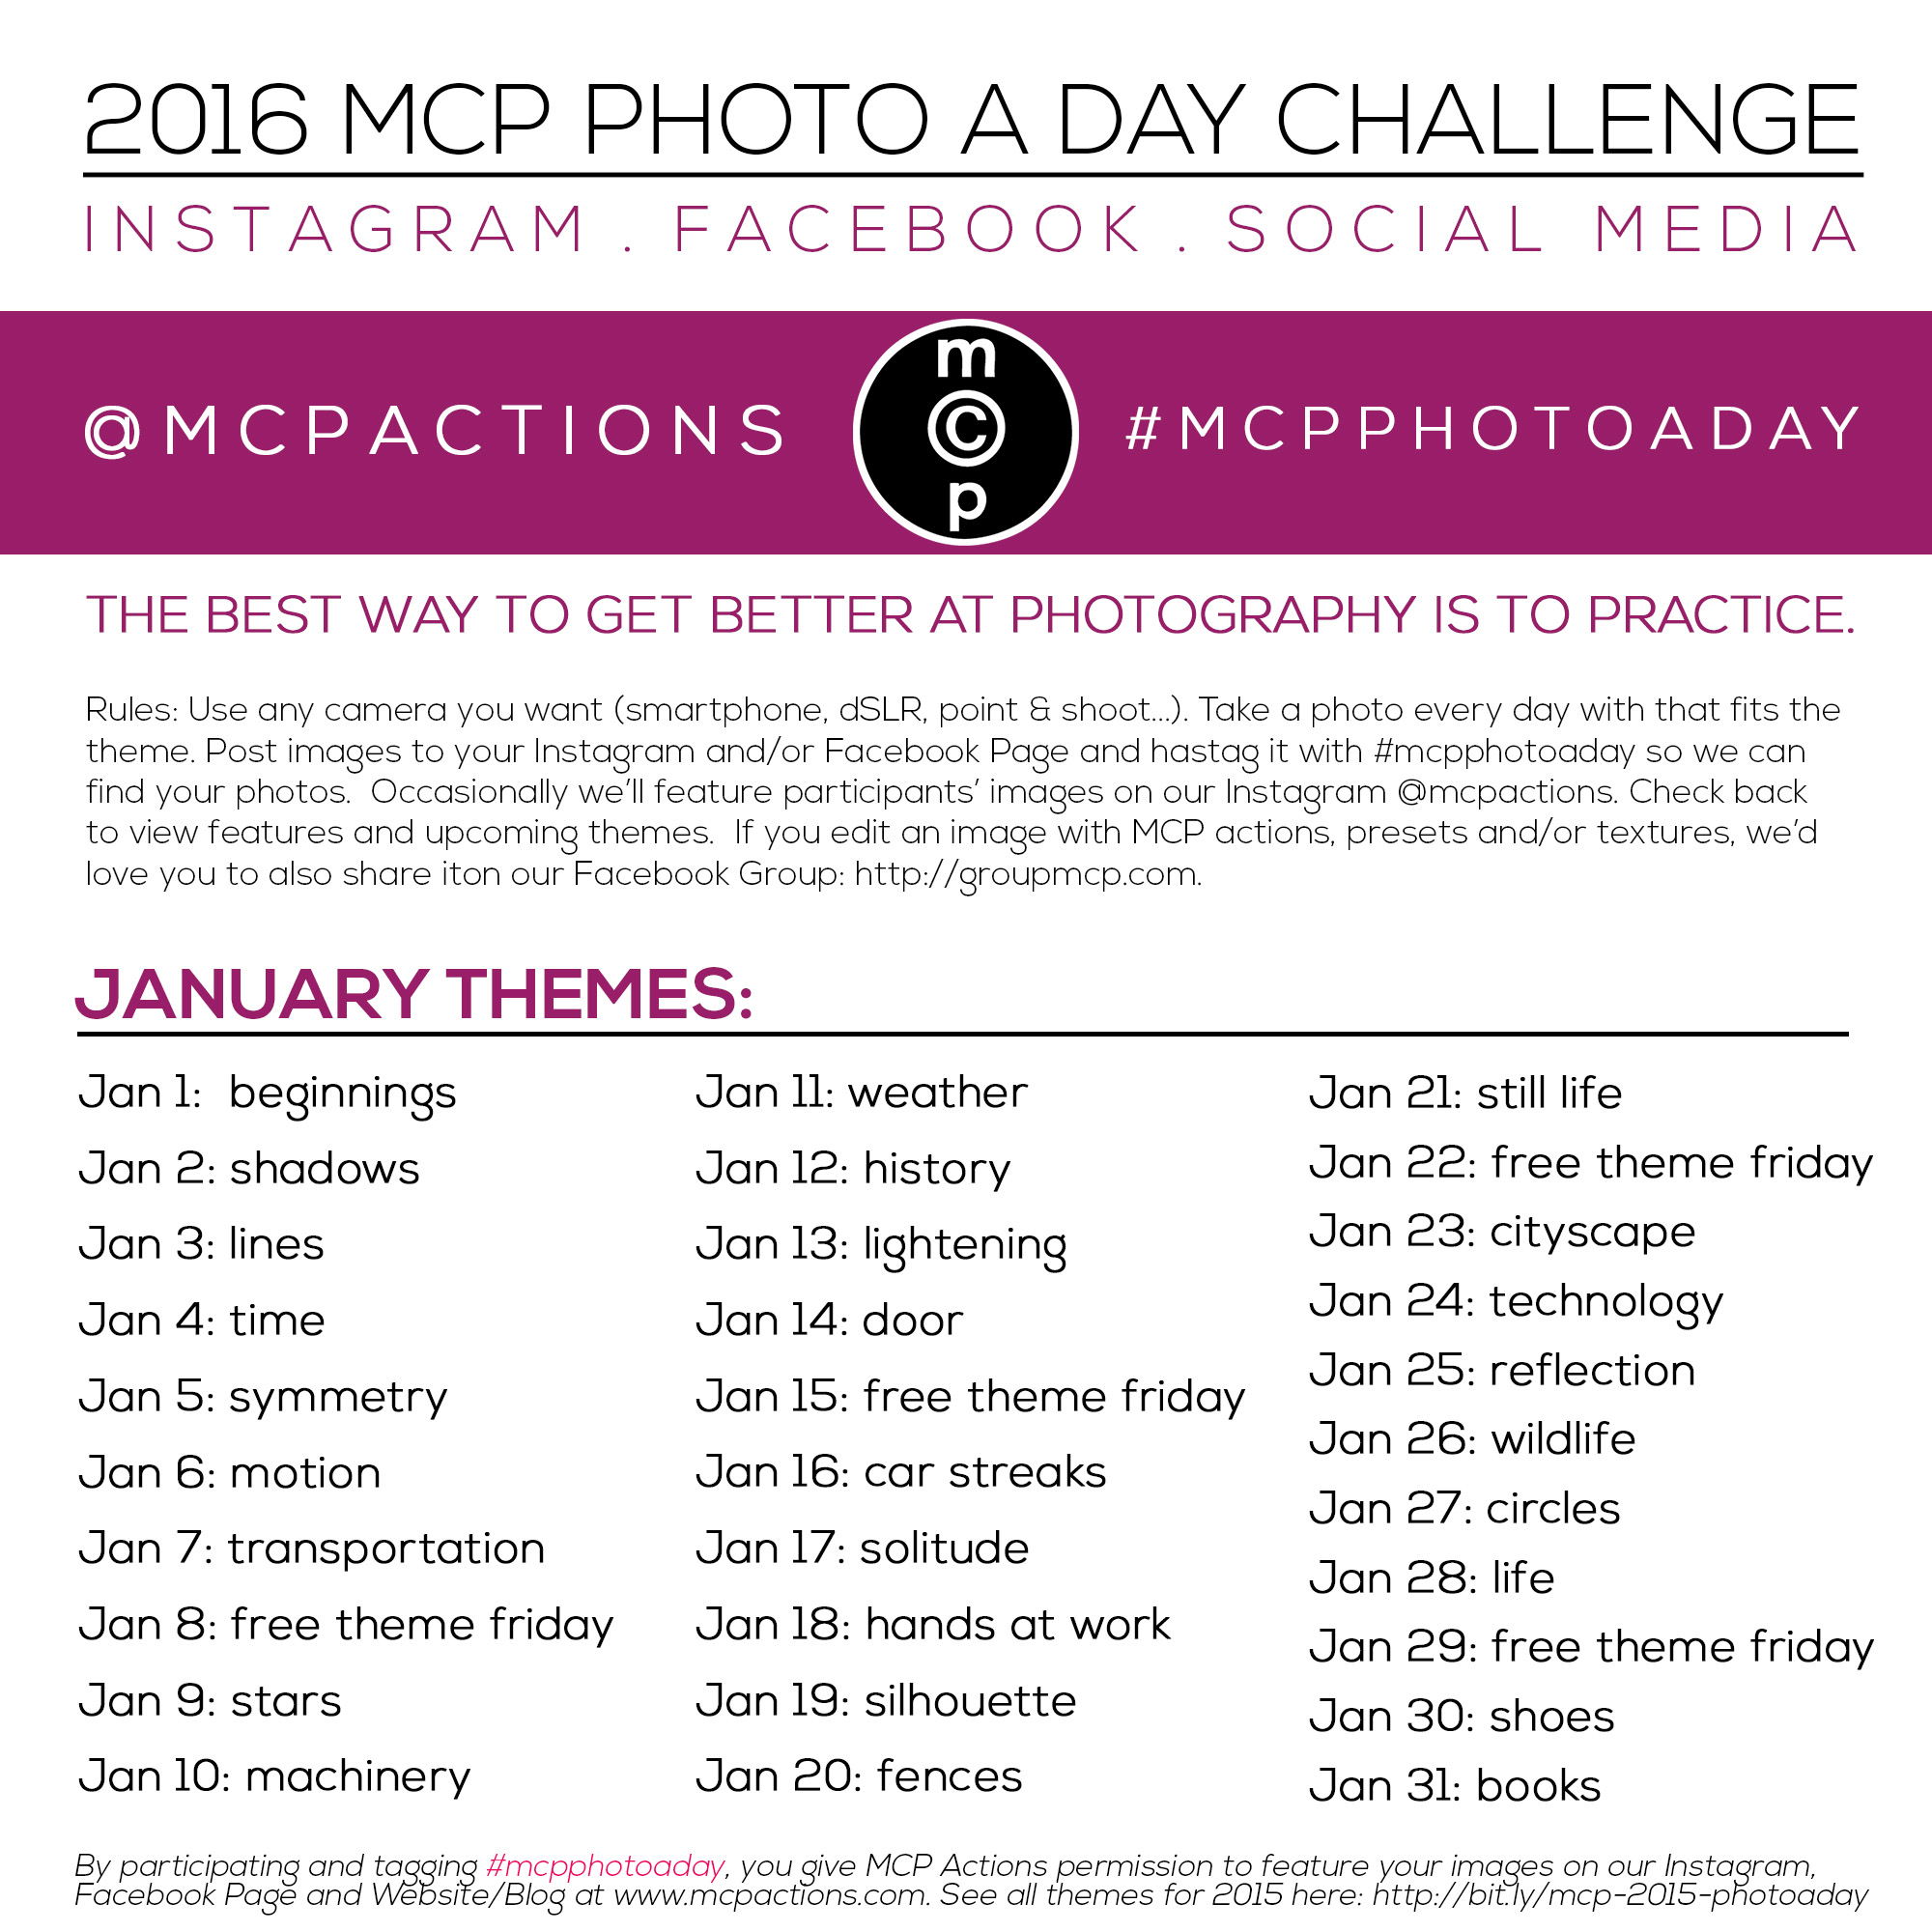 mcpphotoaday-january-2016-filled-out MCP Photo A Day Challenge for 2016 活動 課題 MCP アクション プロジェクト